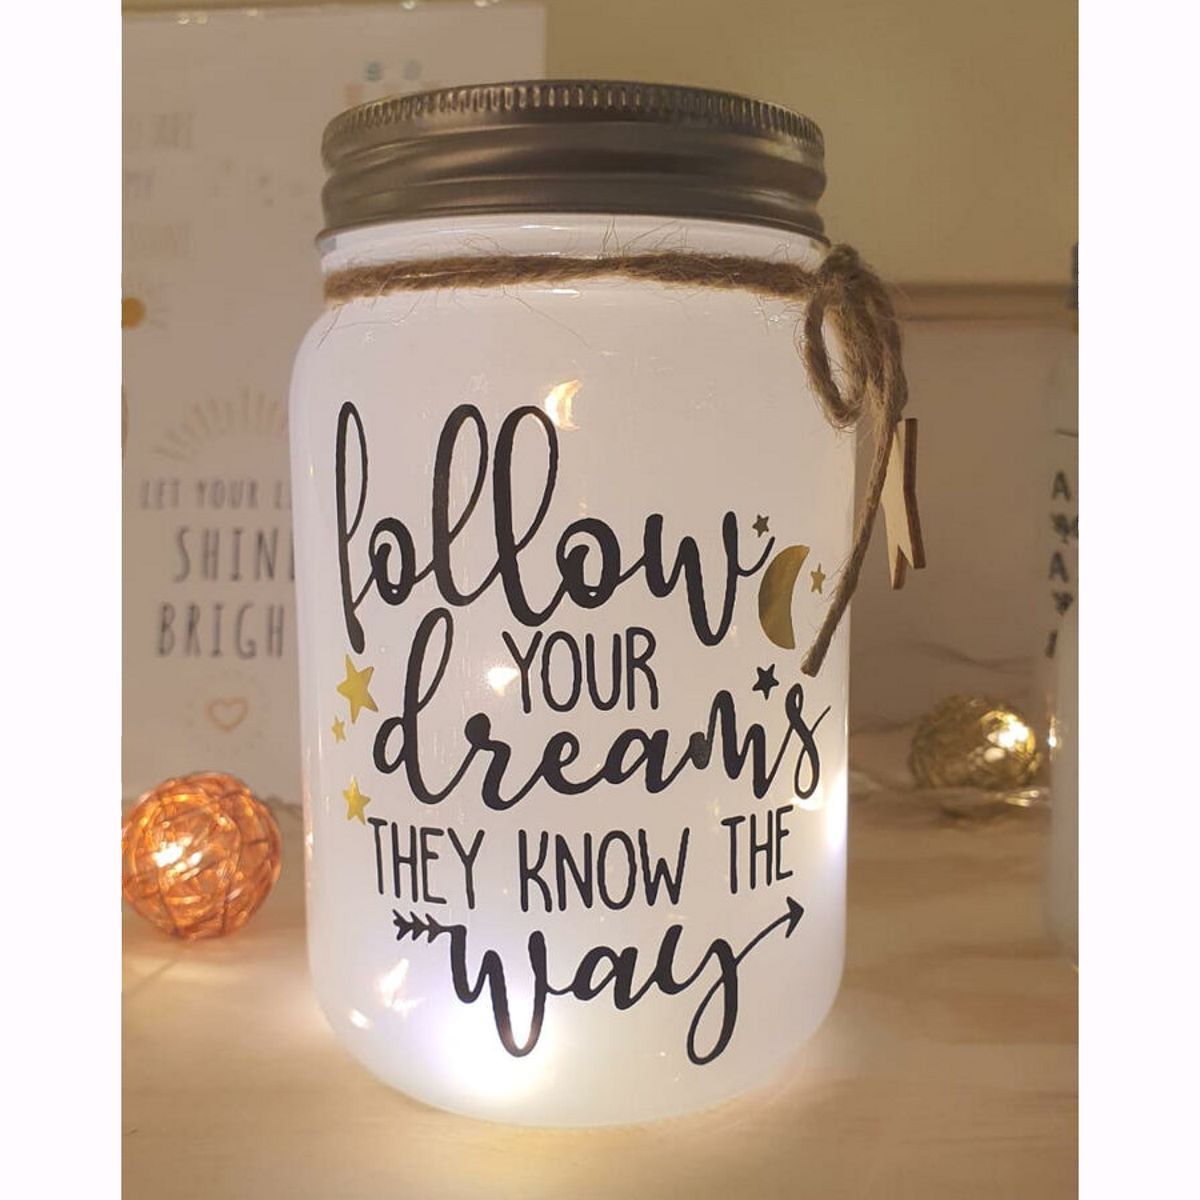 large message sparkle jar - follow your dreams they know the way